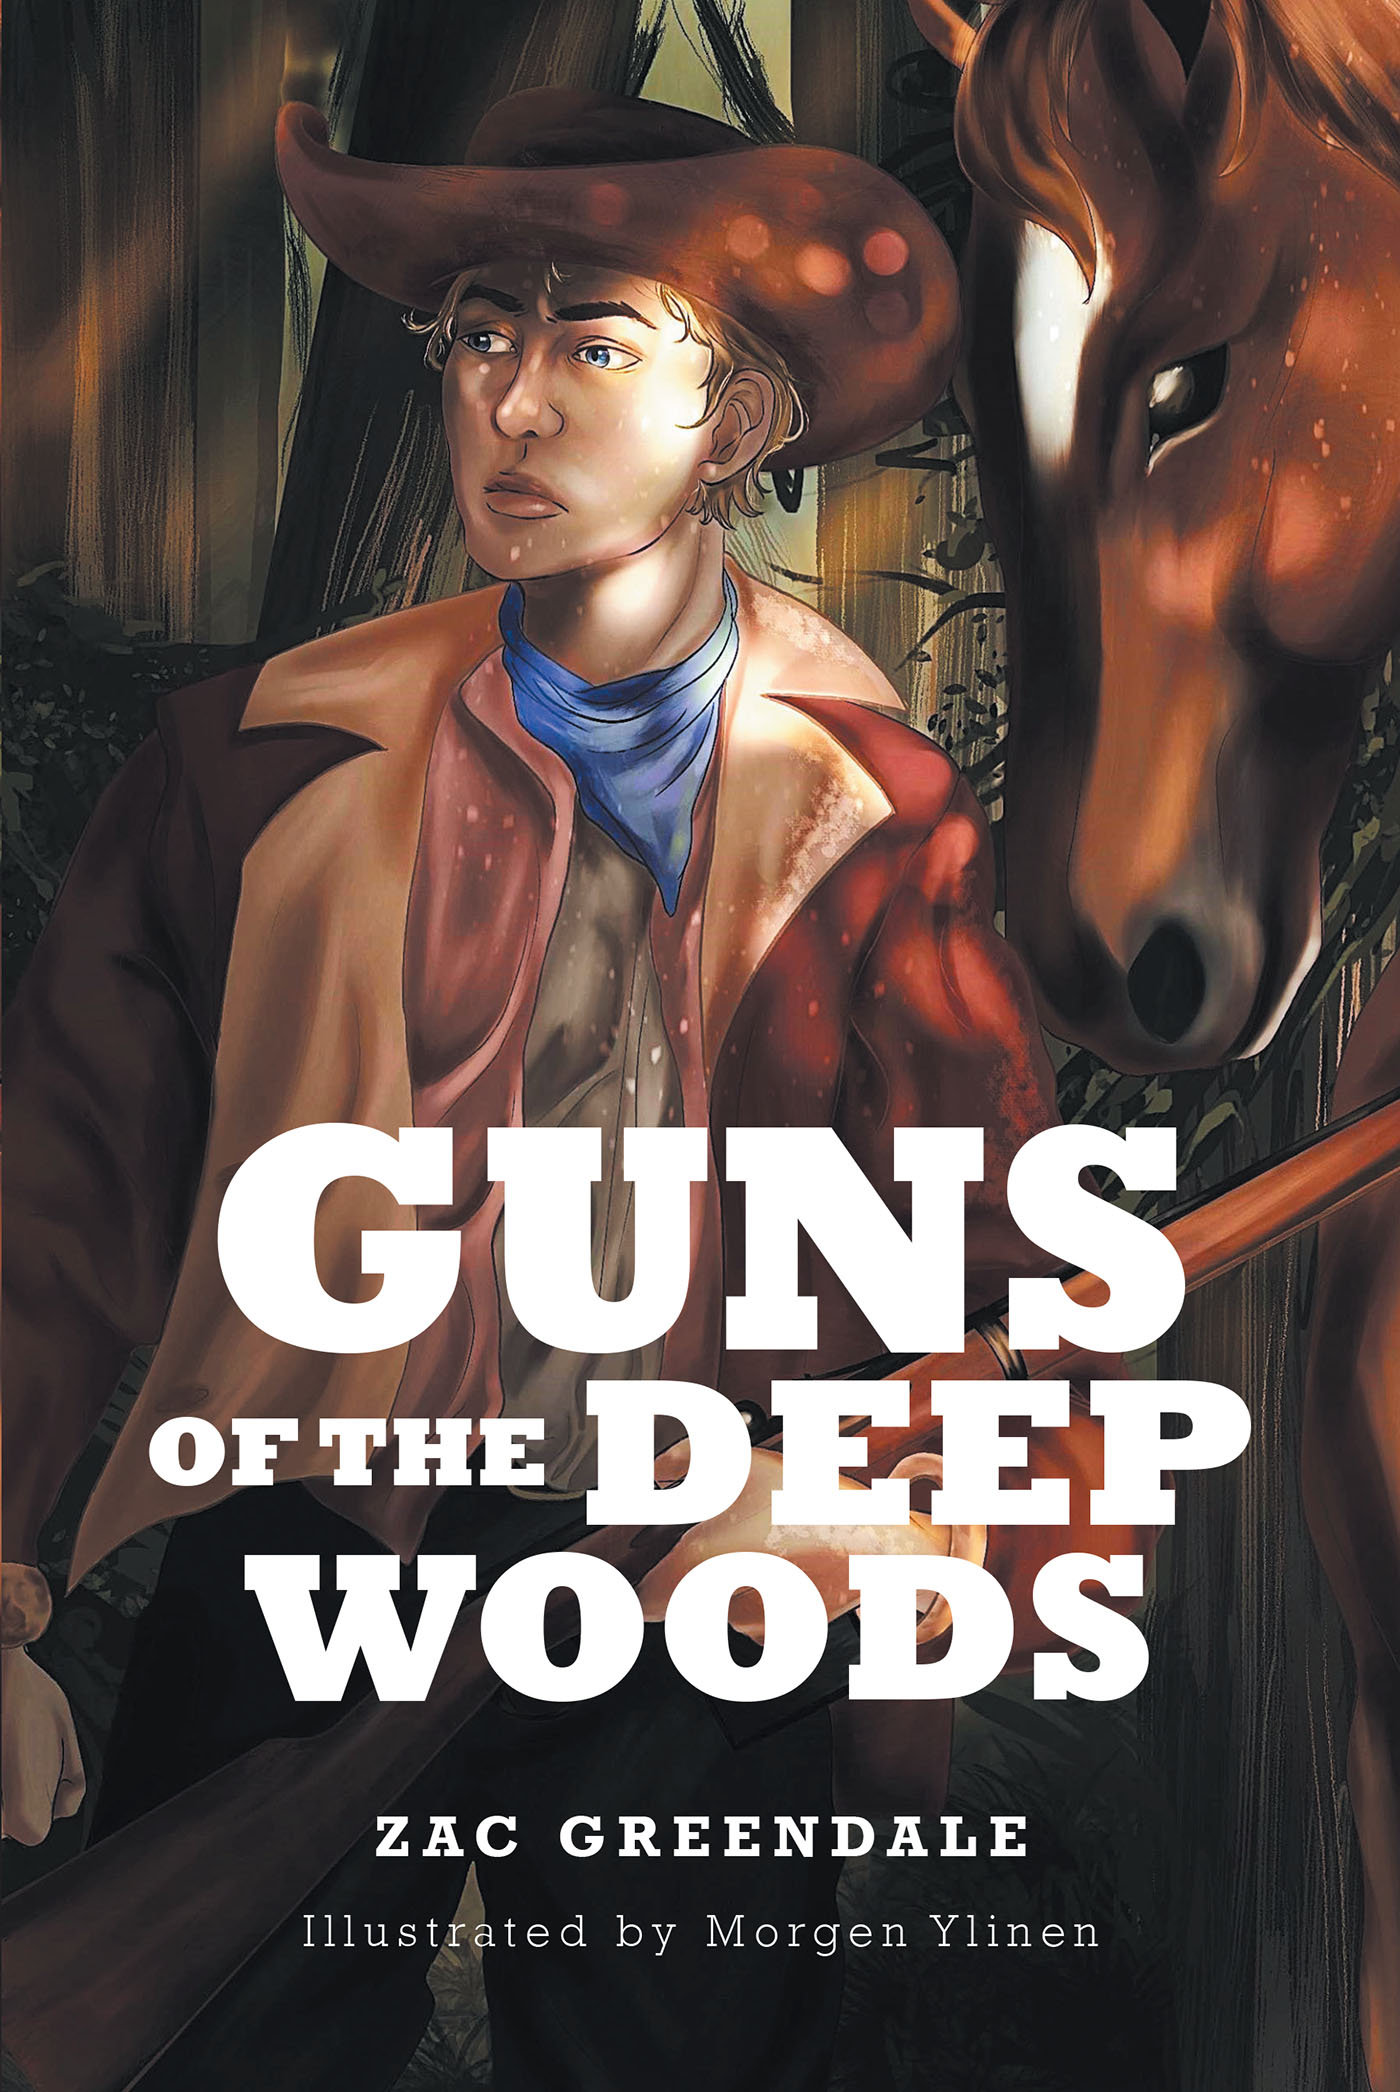 Zac Greendale’s New Book, "Guns of the Deep Woods," Centers Around a Young Boy's Journey to Prevent His Father's Gun Patents from Winding Up in Corrupted Hands